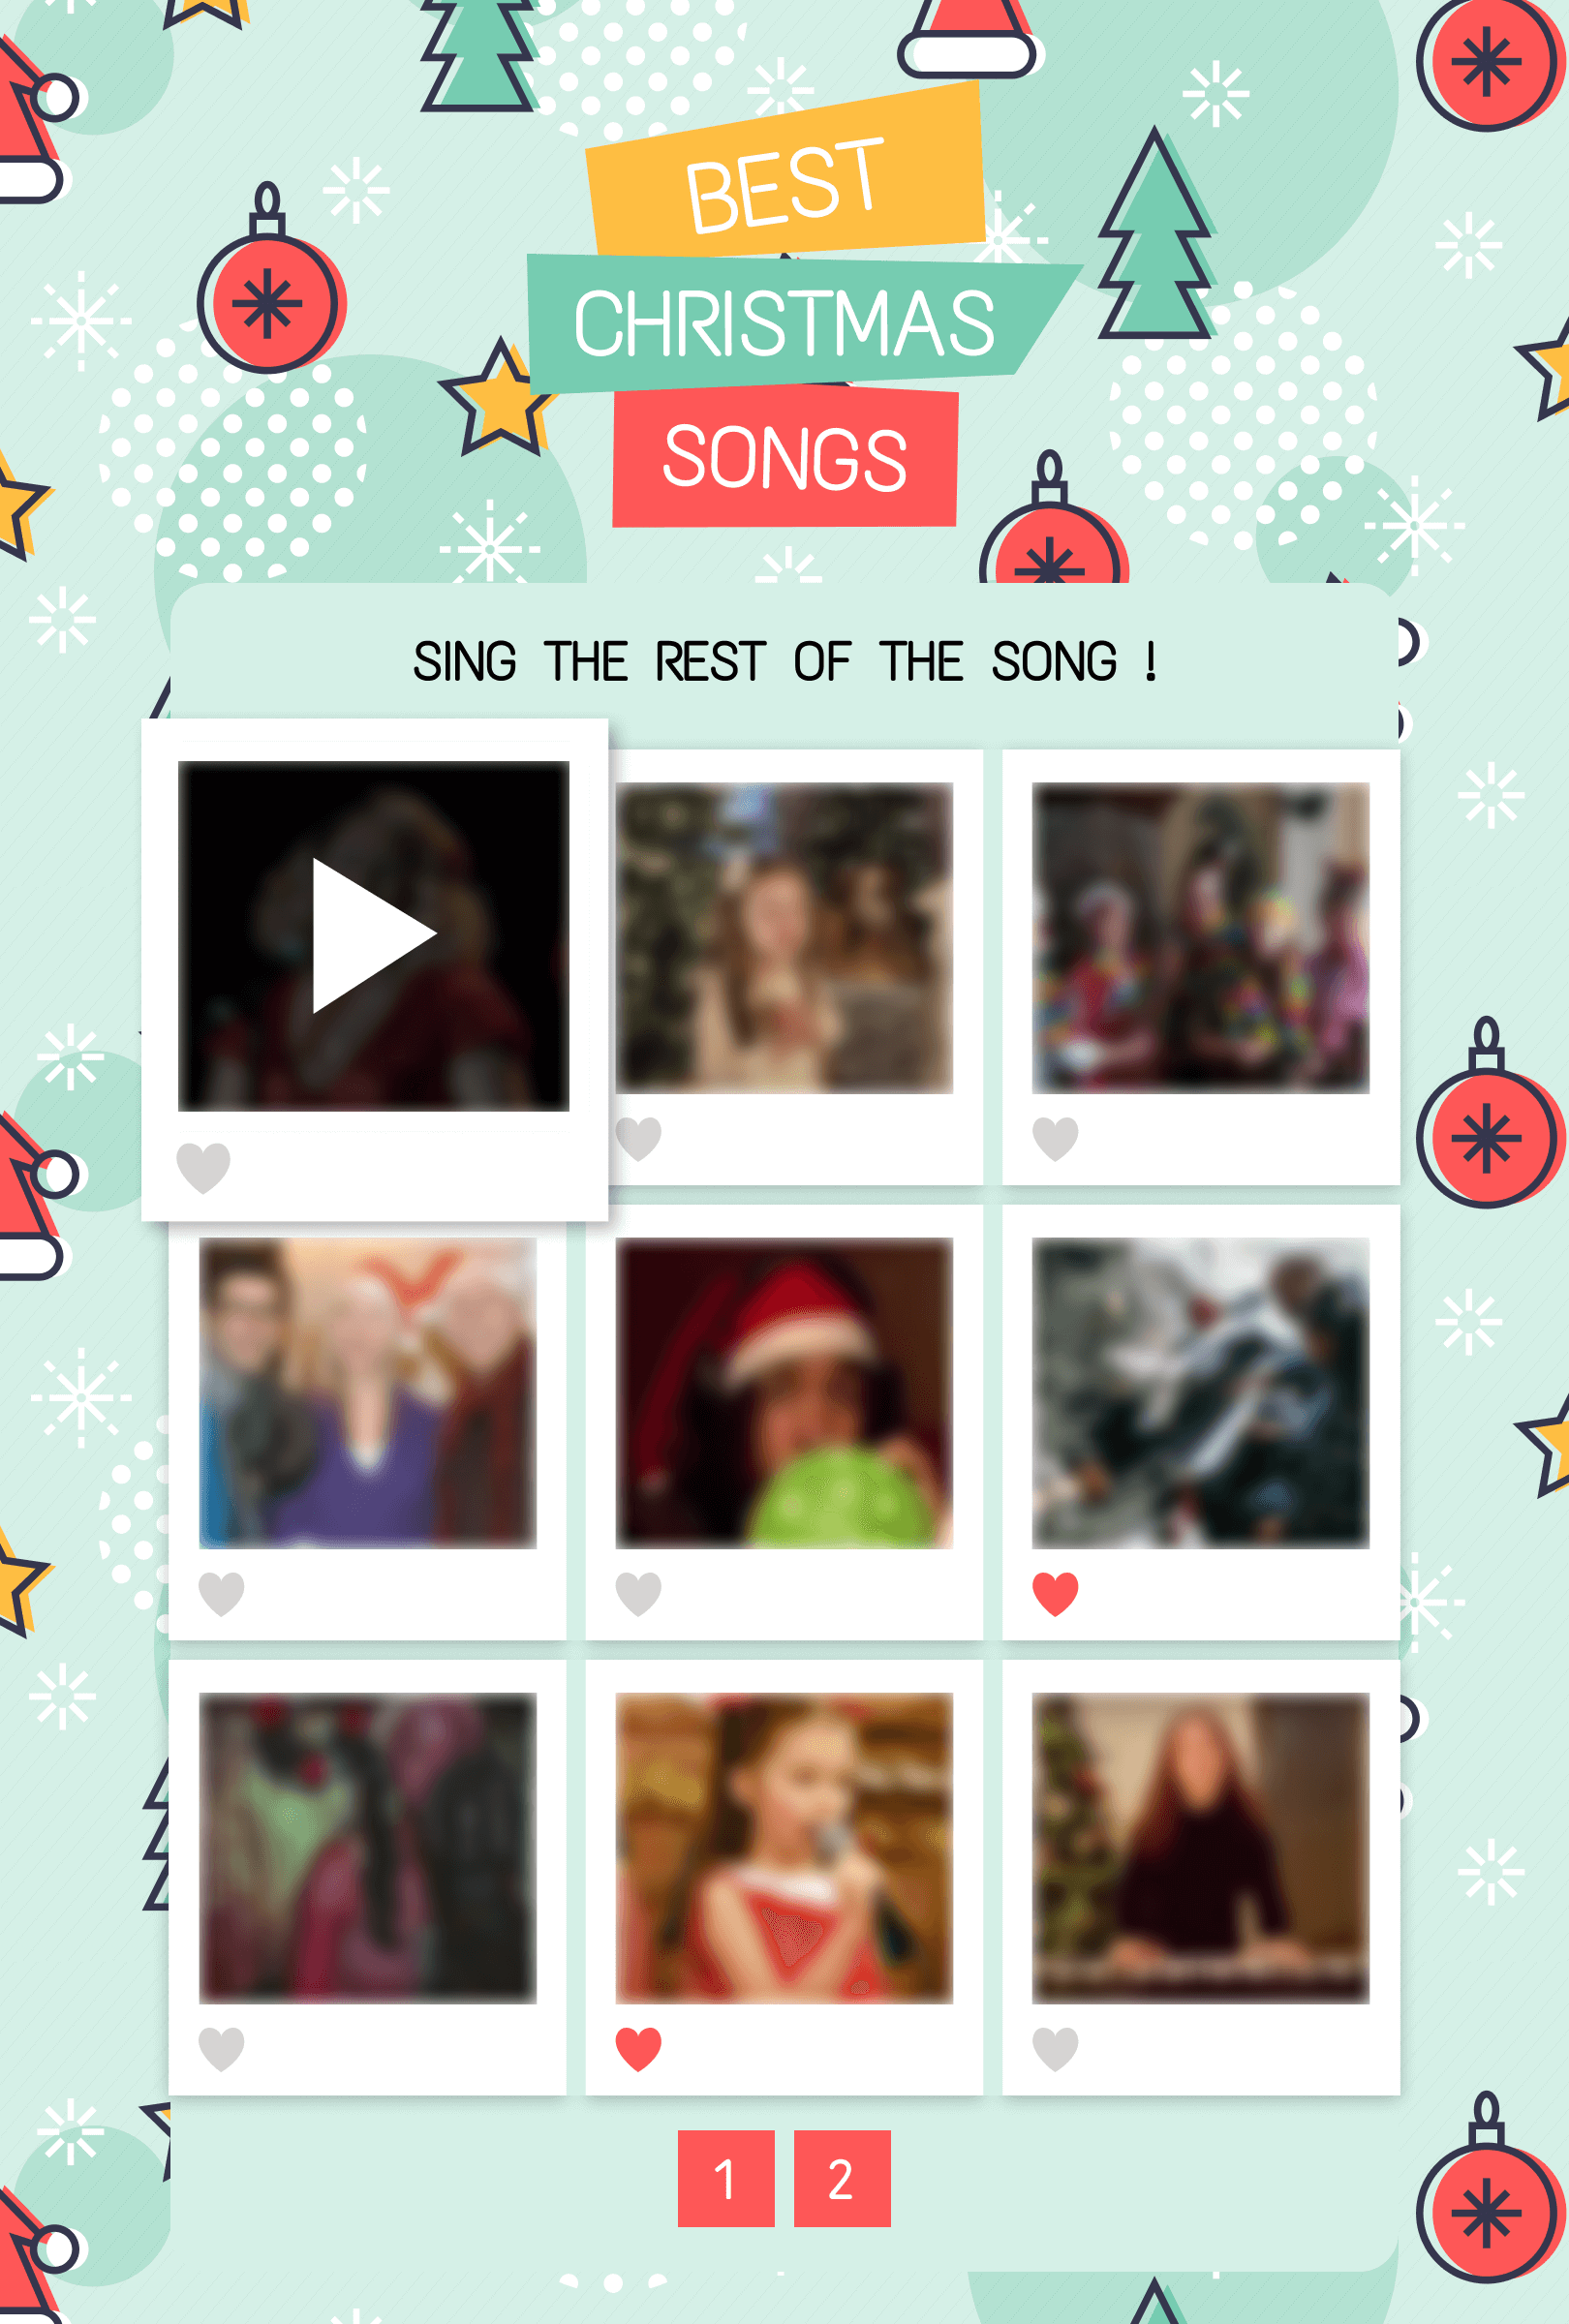 Christmas song holiday contest